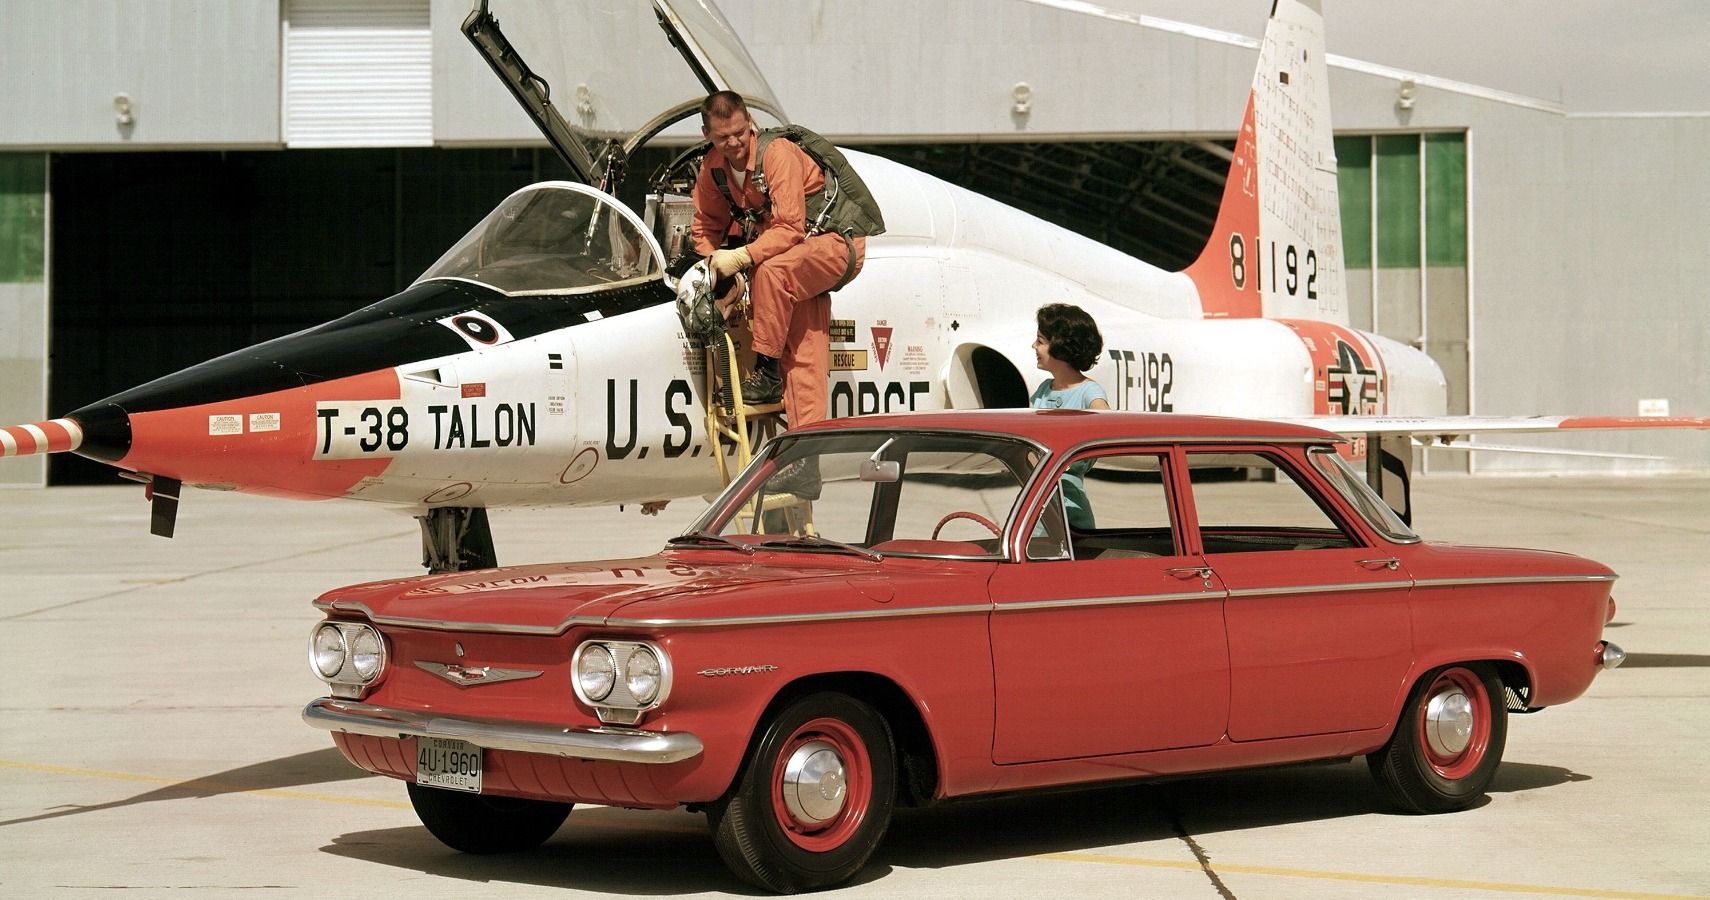 A parked orange 1960 Corvair